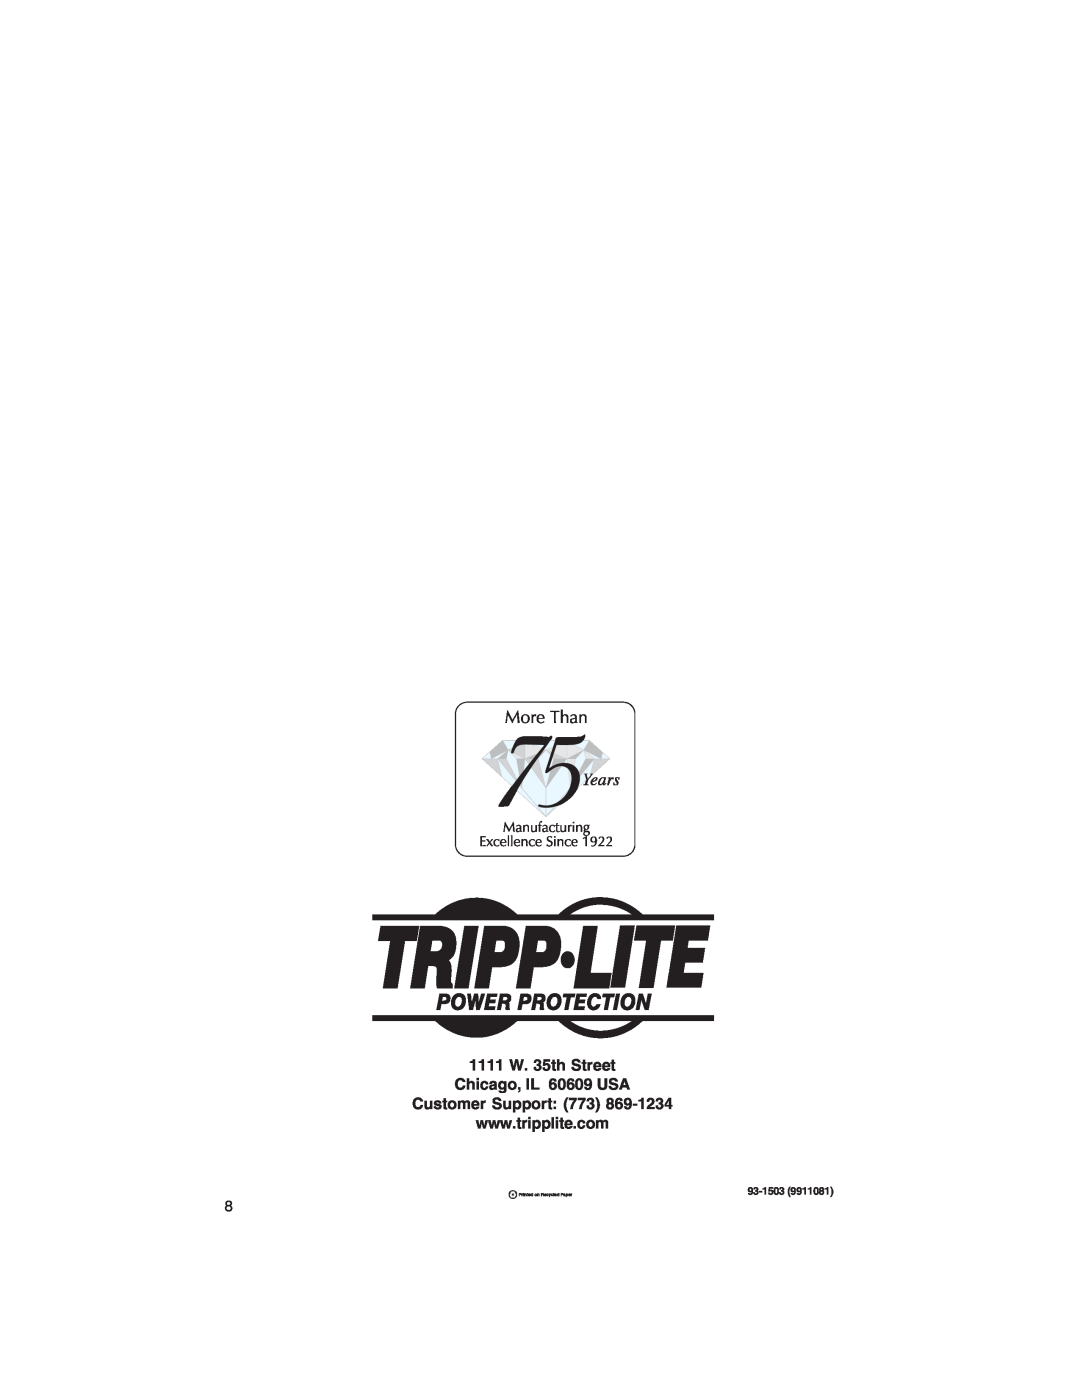 Tripp Lite 2200XLT specifications 1111 W. 35th Street Chicago, IL 60609 USA Customer Support 773, 93-1503 